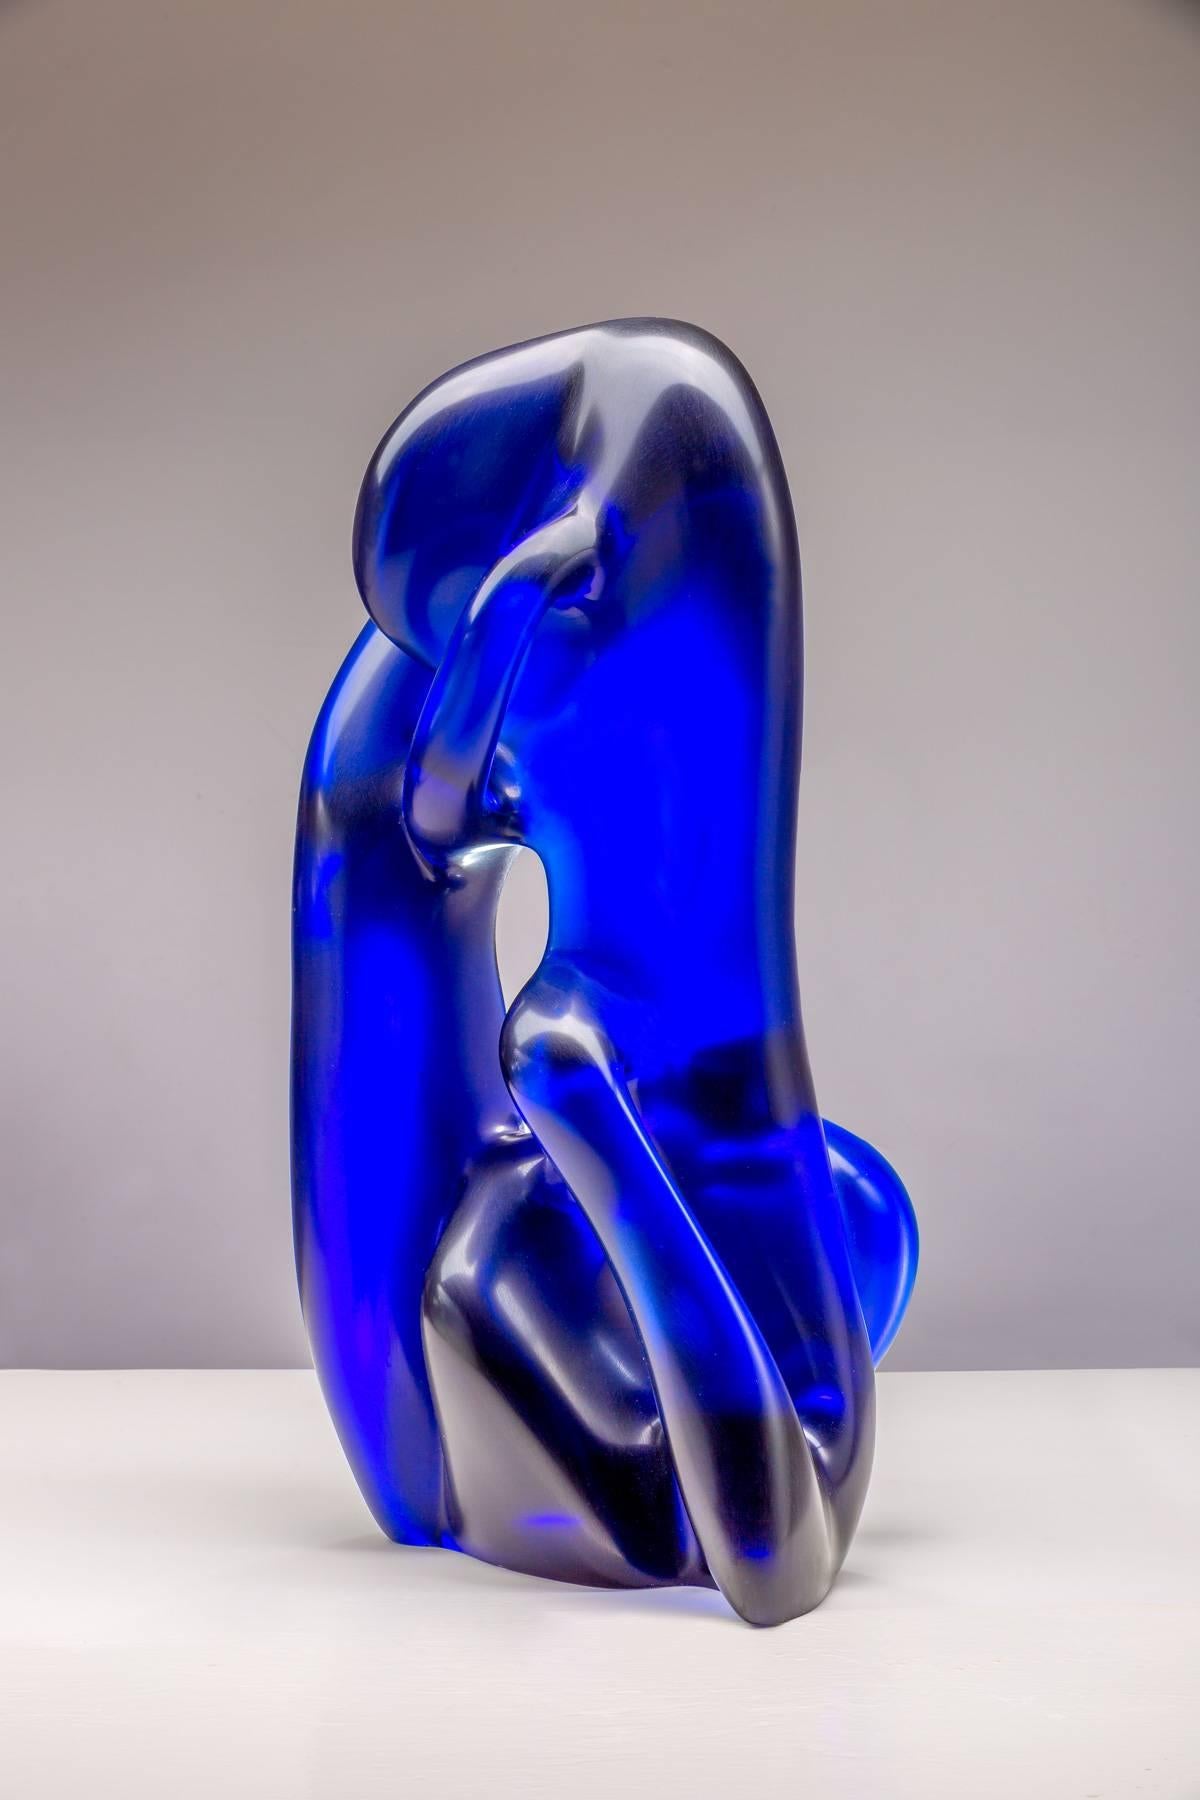 Untitled XV - Sculpture by Laura Leal